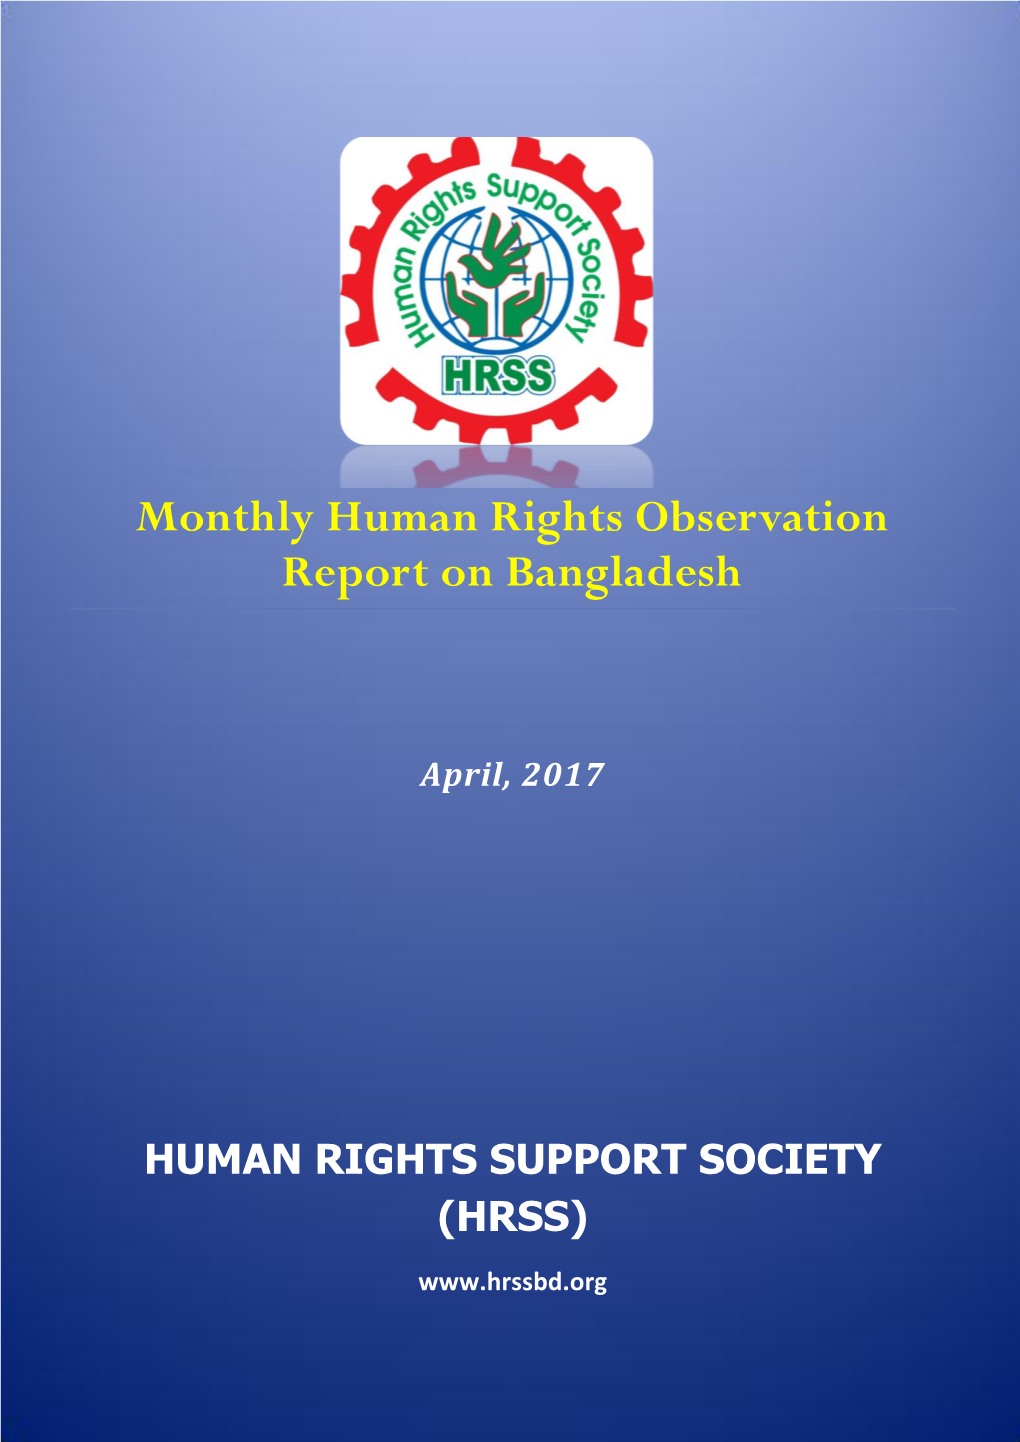 Monthly Human Rights Observation Report on Bangladesh,April'17